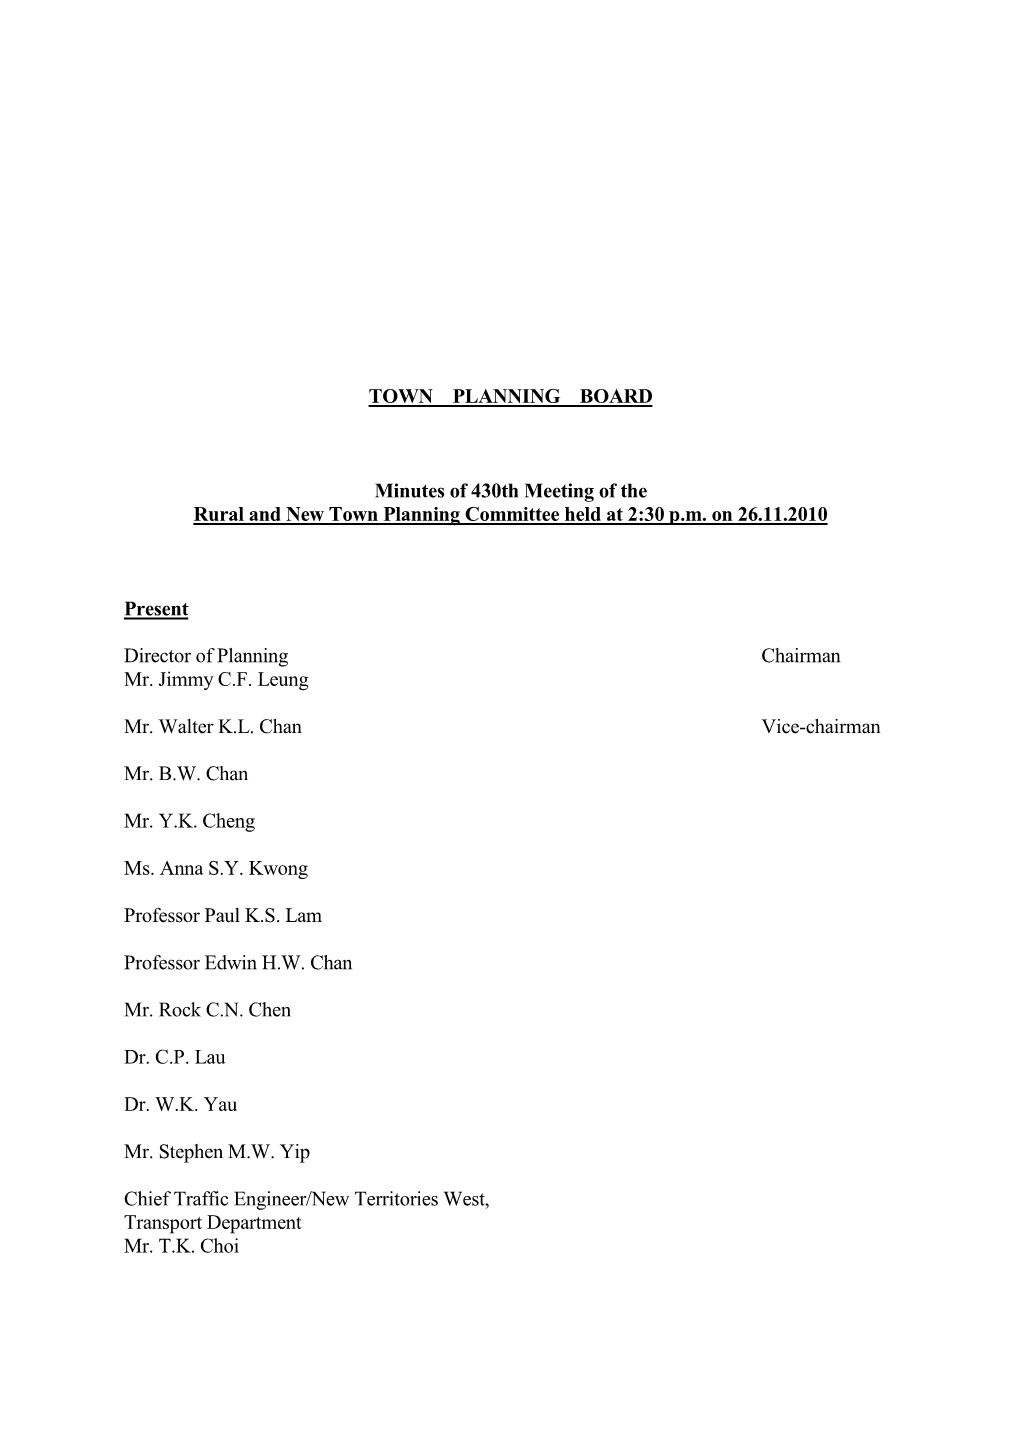 TOWN PLANNING BOARD Minutes of 430Th Meeting of the Rural And